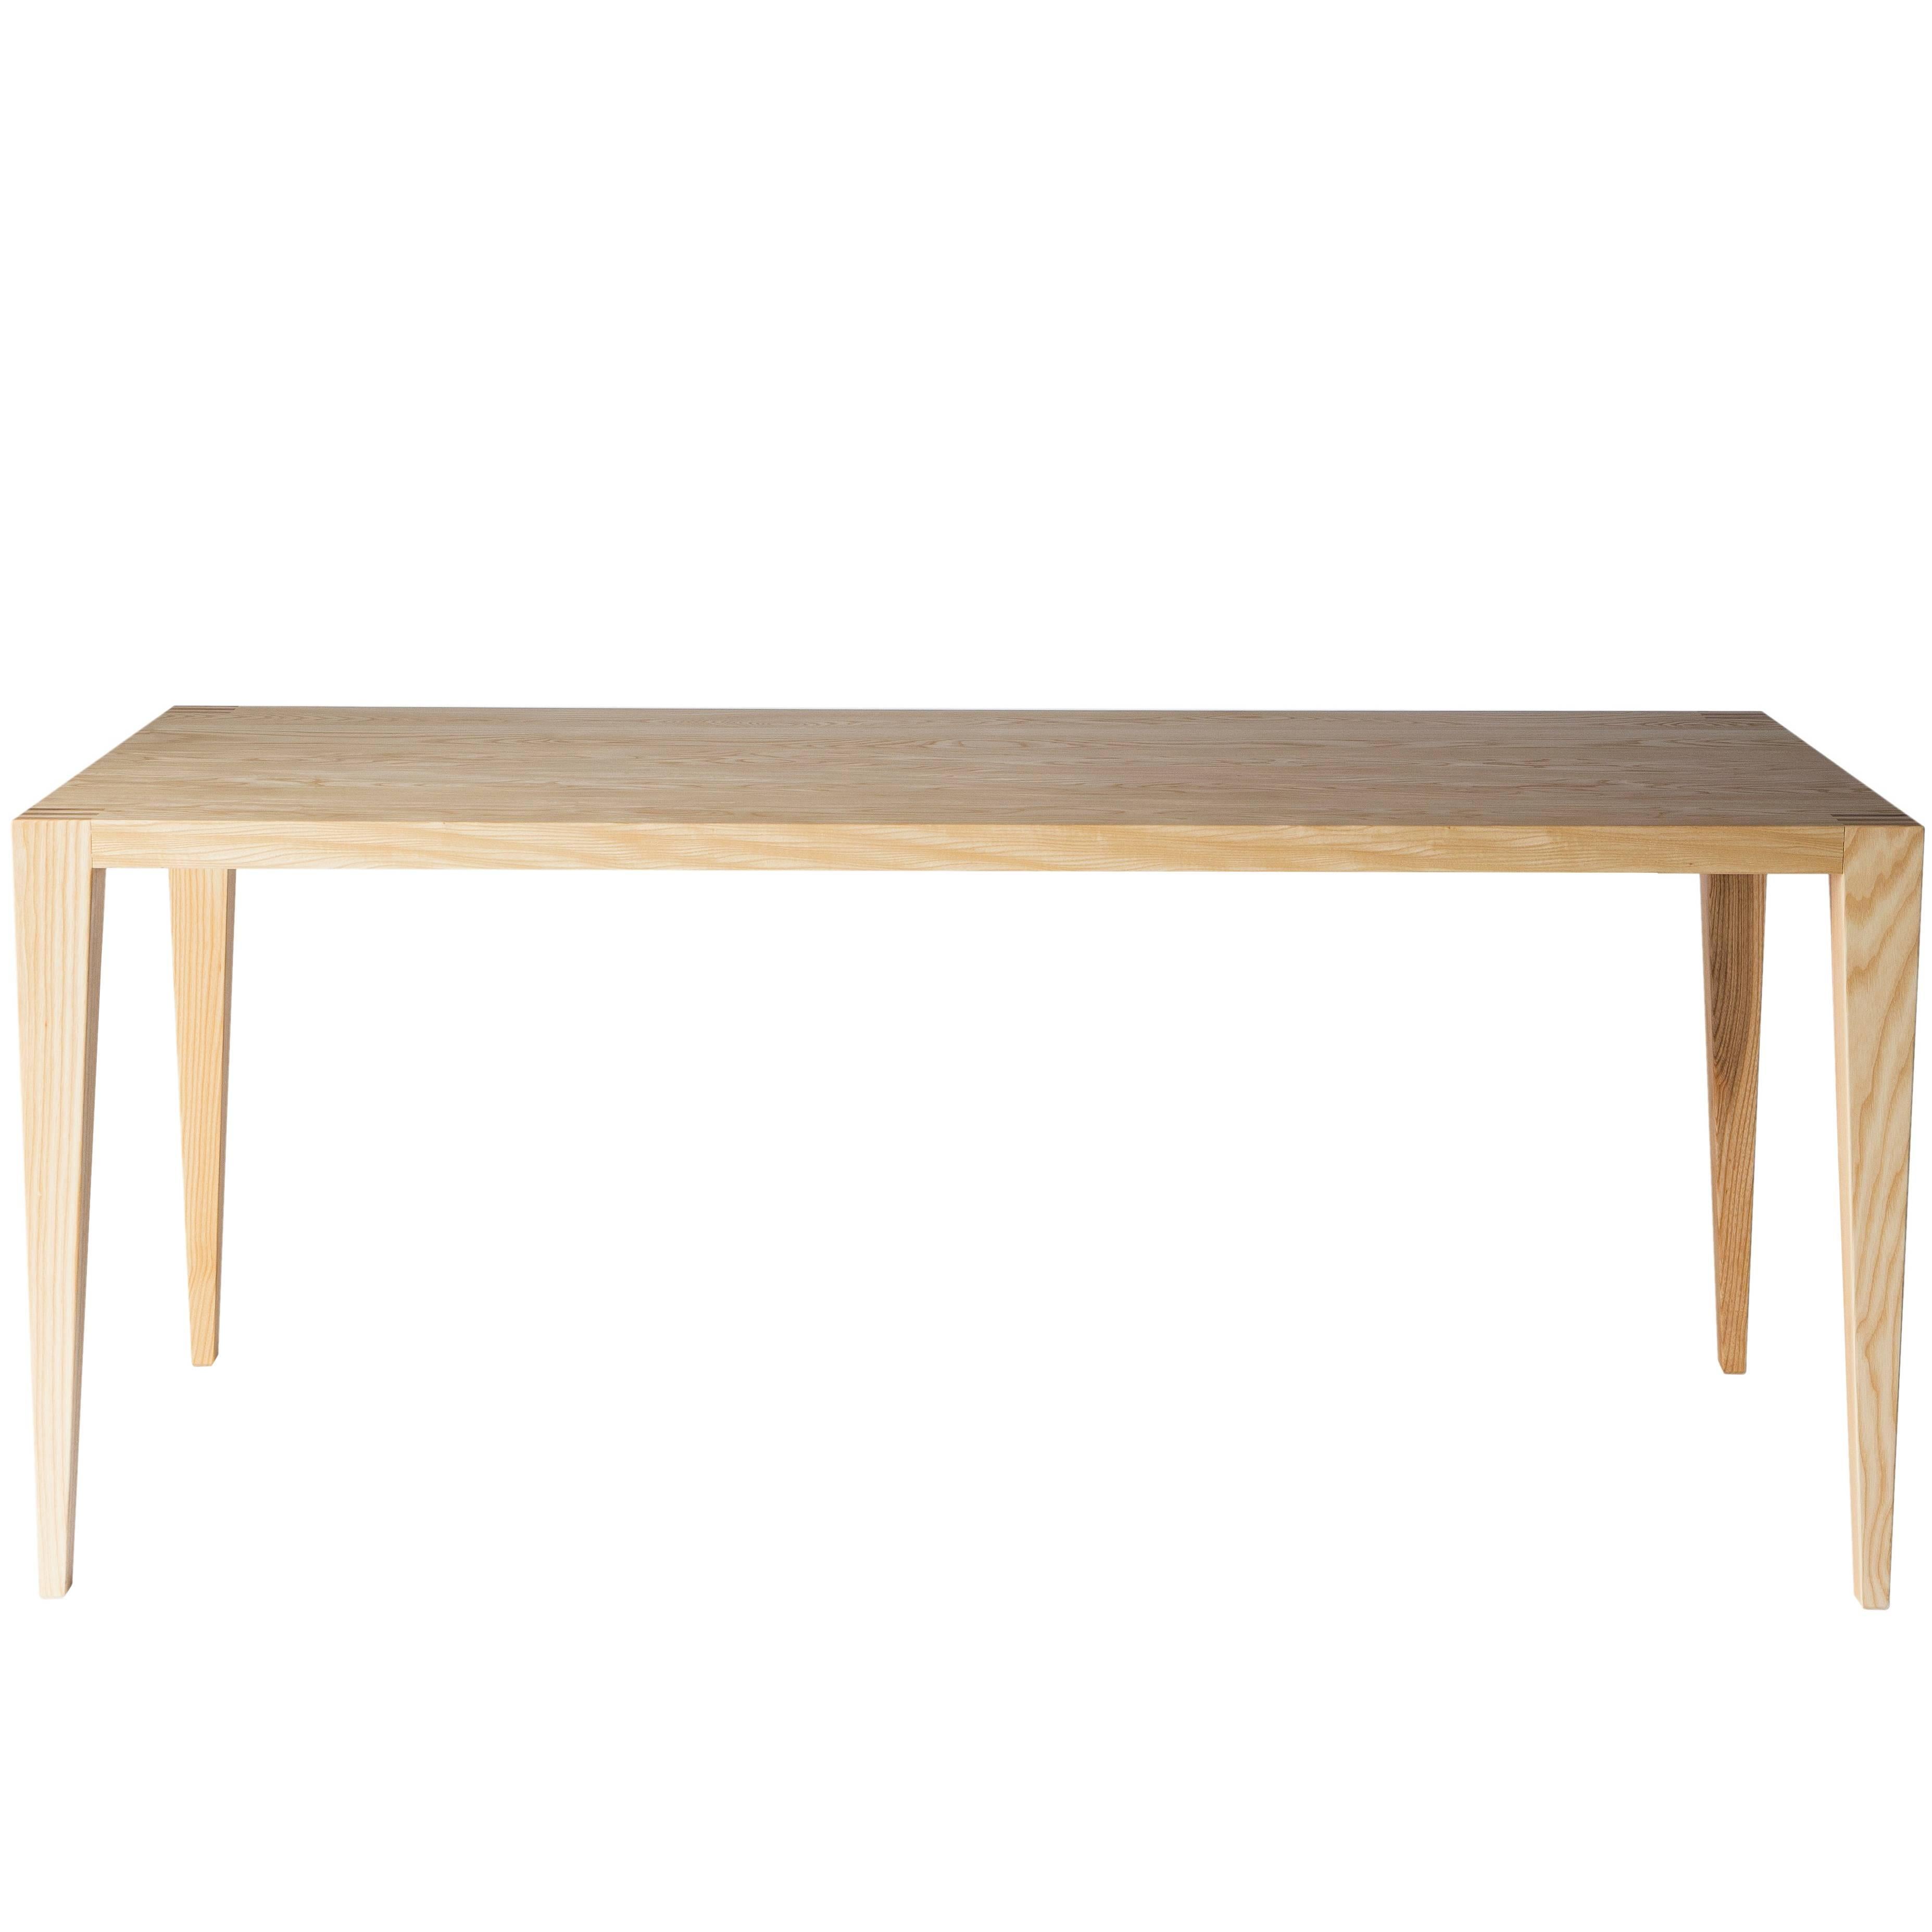 Angela Adams Tula Dining Table in Ash / Natural, Seats Six, Handcrafted, Modern For Sale